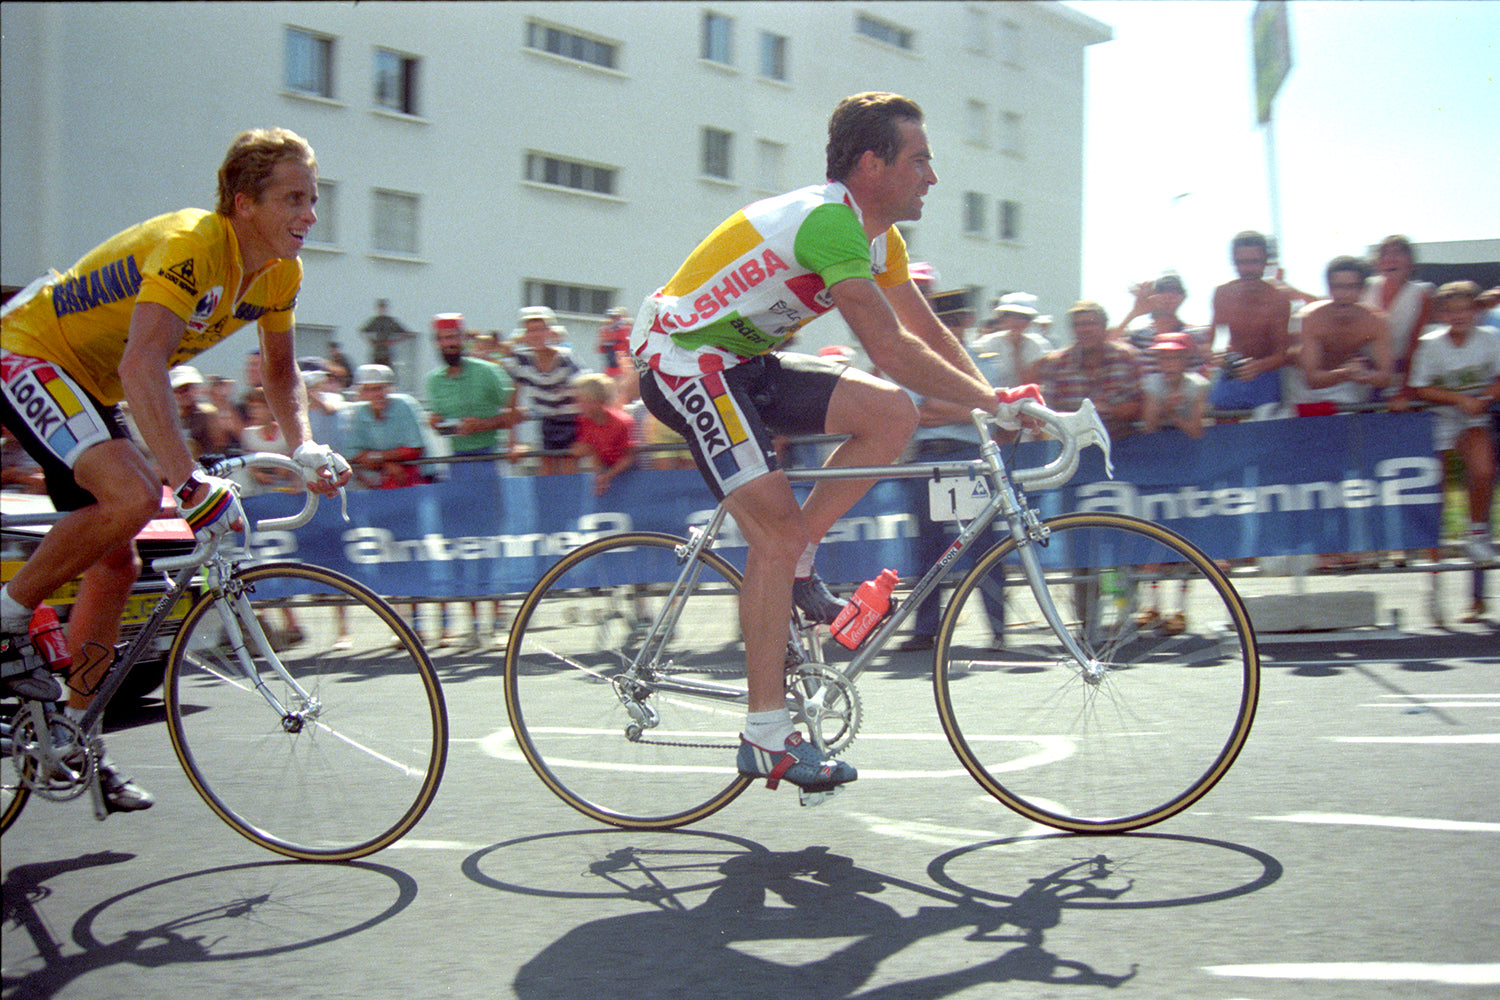 Bernard Hinault (Right, Combination jersey) leads race leader and La Vie Claire team mate Greg Lemond on that famous stage from Briançon to the summit of l'Alpe d'Huez. Photo: Fotoreporter Sirotti.